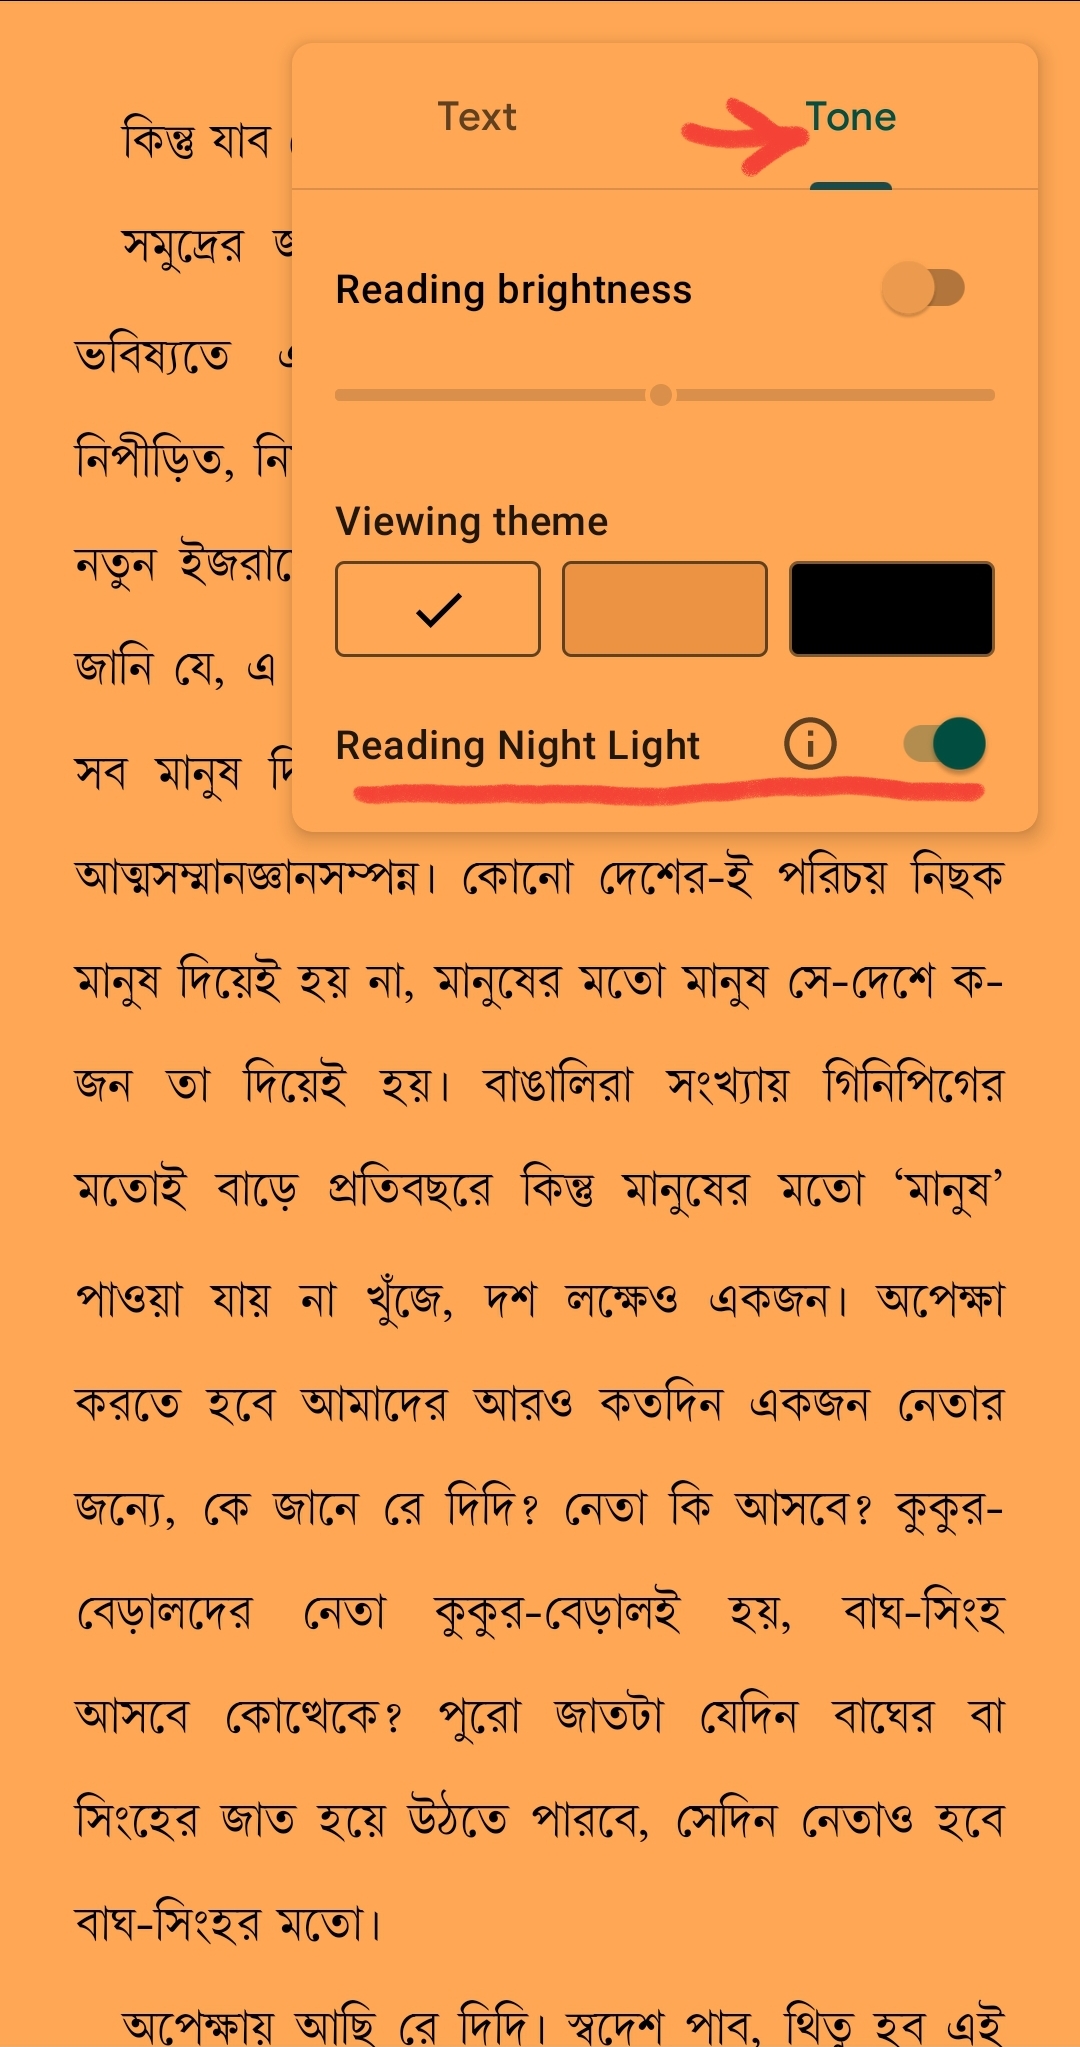 How To Turn On/Off Reading Night Light In Google Play Books?